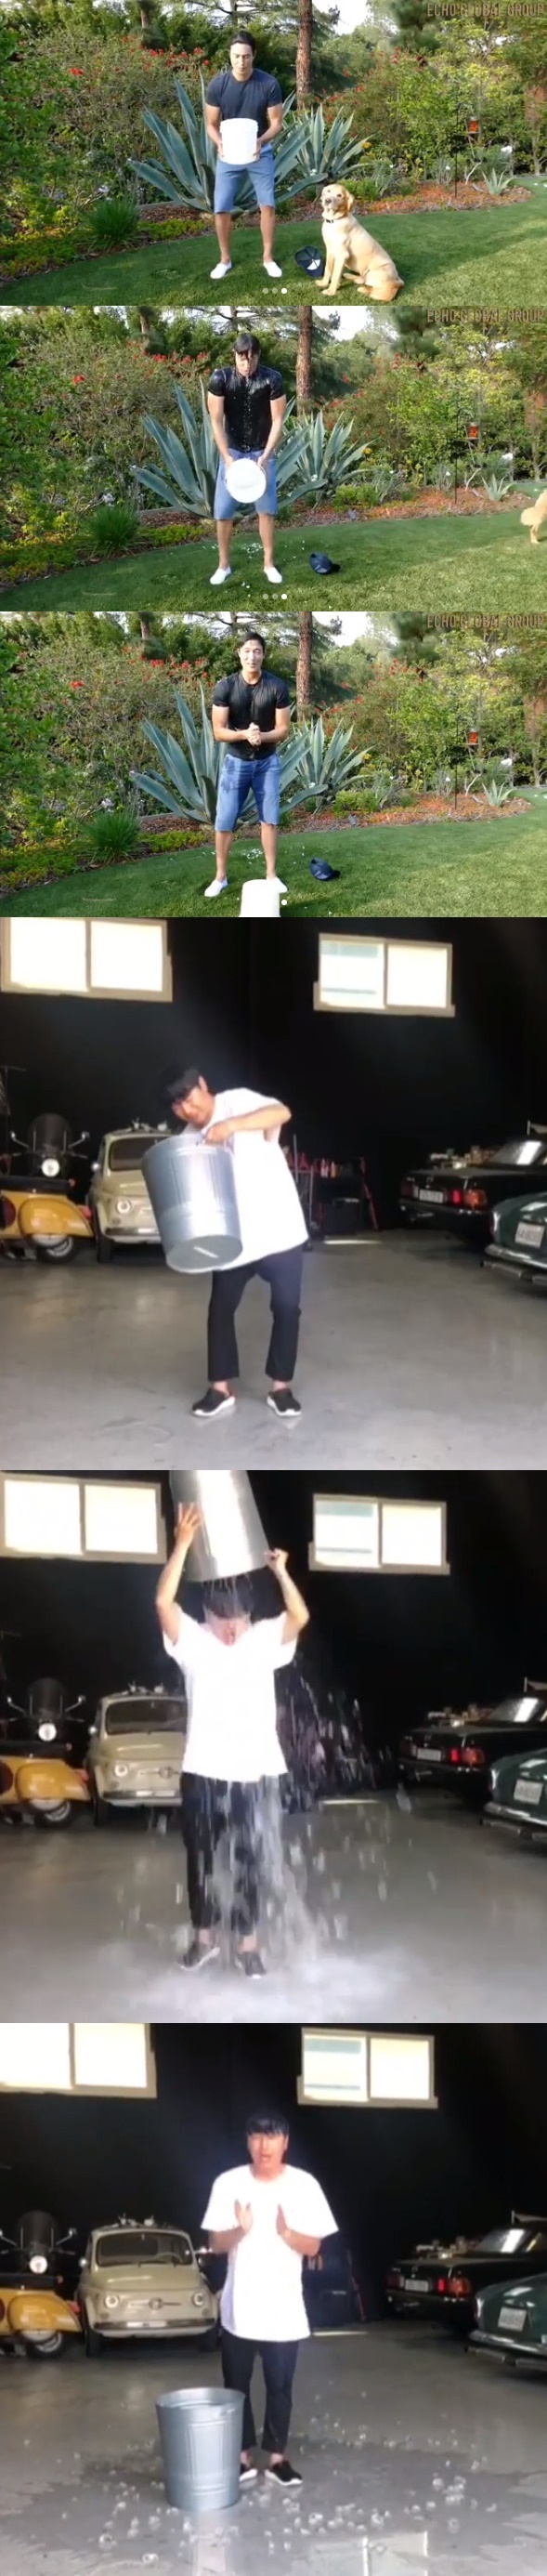 Daniel Henney and Lee Si-eon posted a video of their Ice bucket challenge on their agency and their SNS on the 31st.Daniel Henney said through his agency SNS, I would like to express my gratitude to my friend Sean, who has identified me as the second runner of Koreas Ice bucket challenge. He said he hoped the construction of the Lou Gehrig Nursing Hospital would be successful.Park Narae, Lee Si-eon and golfer Lydia Goh were next Ice bucket challengers.Lee Si-eon also joined the Ice bucket challenge through her social media.Im joined by Daniel Henneys Ice bucket challenge pick; thank you to Daniel Henney for letting me join in the good work.I hope that patients with Lou Gehrigs disease will be treated in a good environment through this work. The next person I will point to is Kim Jun-myeon actor of Exo, Jun Hyon-moo, Rainbow chairman, and actor Park Hyung-hyun.